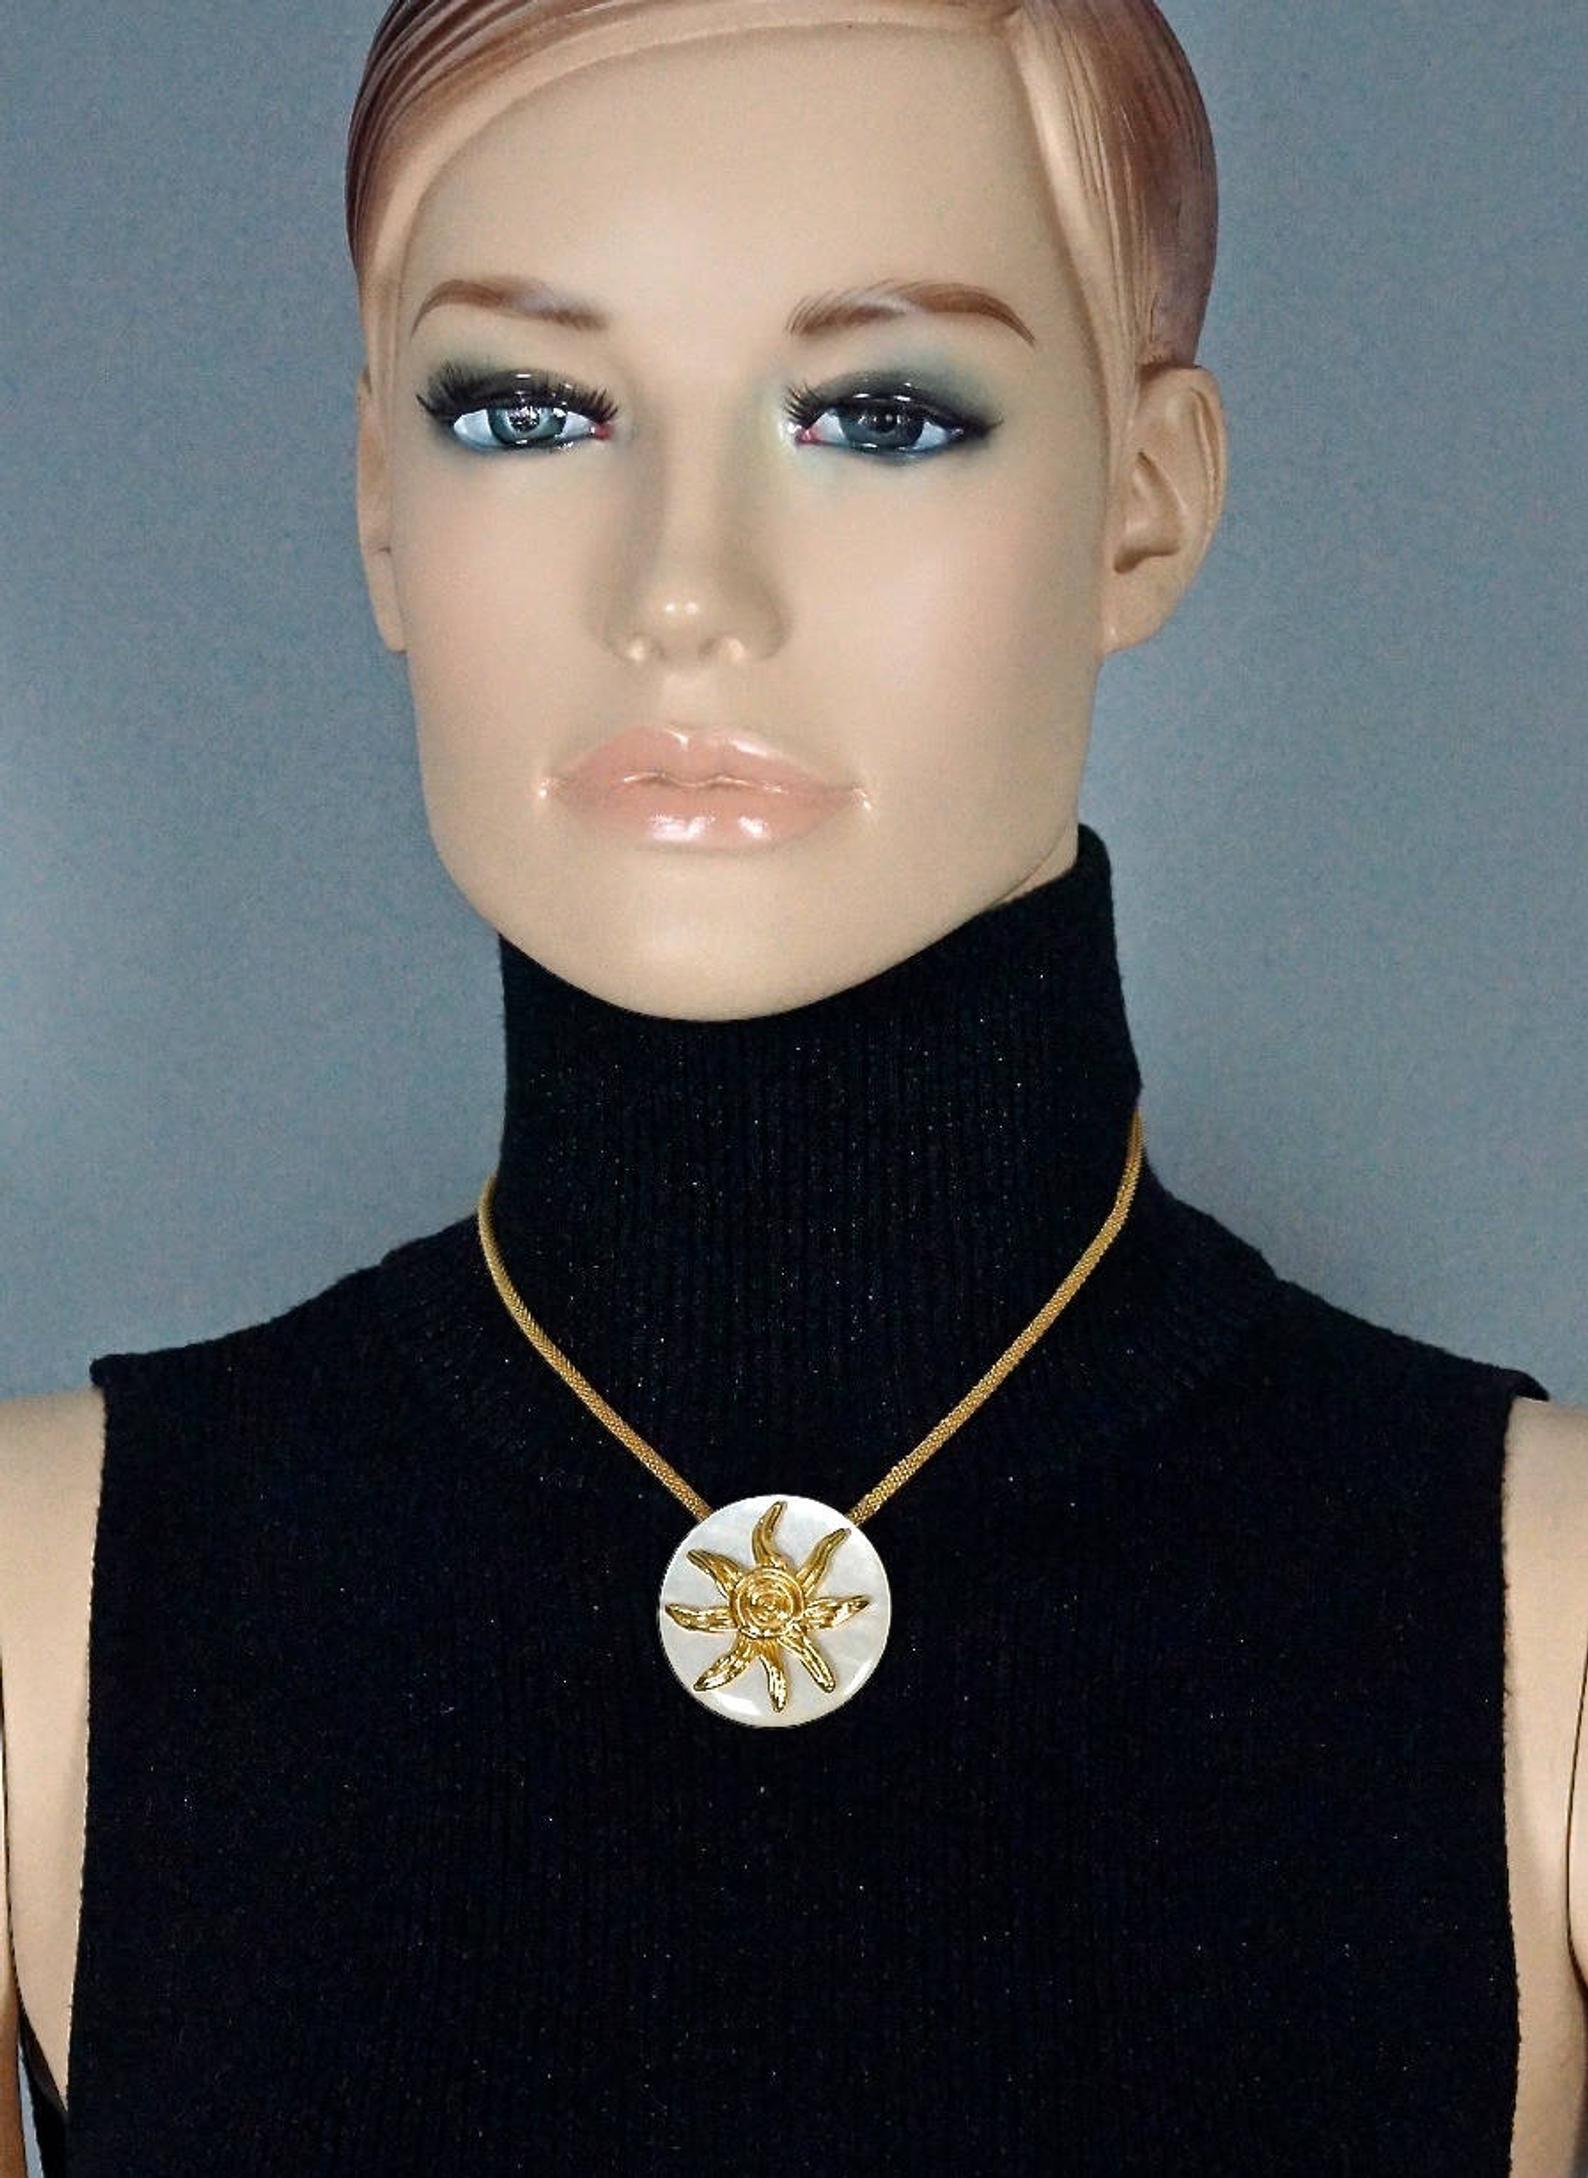 Vintage YVES SAINT LAURENT Ysl Sun Spiral Pearly White Medallion Disc Necklace

Measurements:
Medallion: 1.61 inches (4.1 cm)
Wearable Length: 16.73 inches to 18.70 inches (42.5 cm to 47.5 cm)
Weight: 23 grams

Features:
- 100% Authentic YVES SAINT